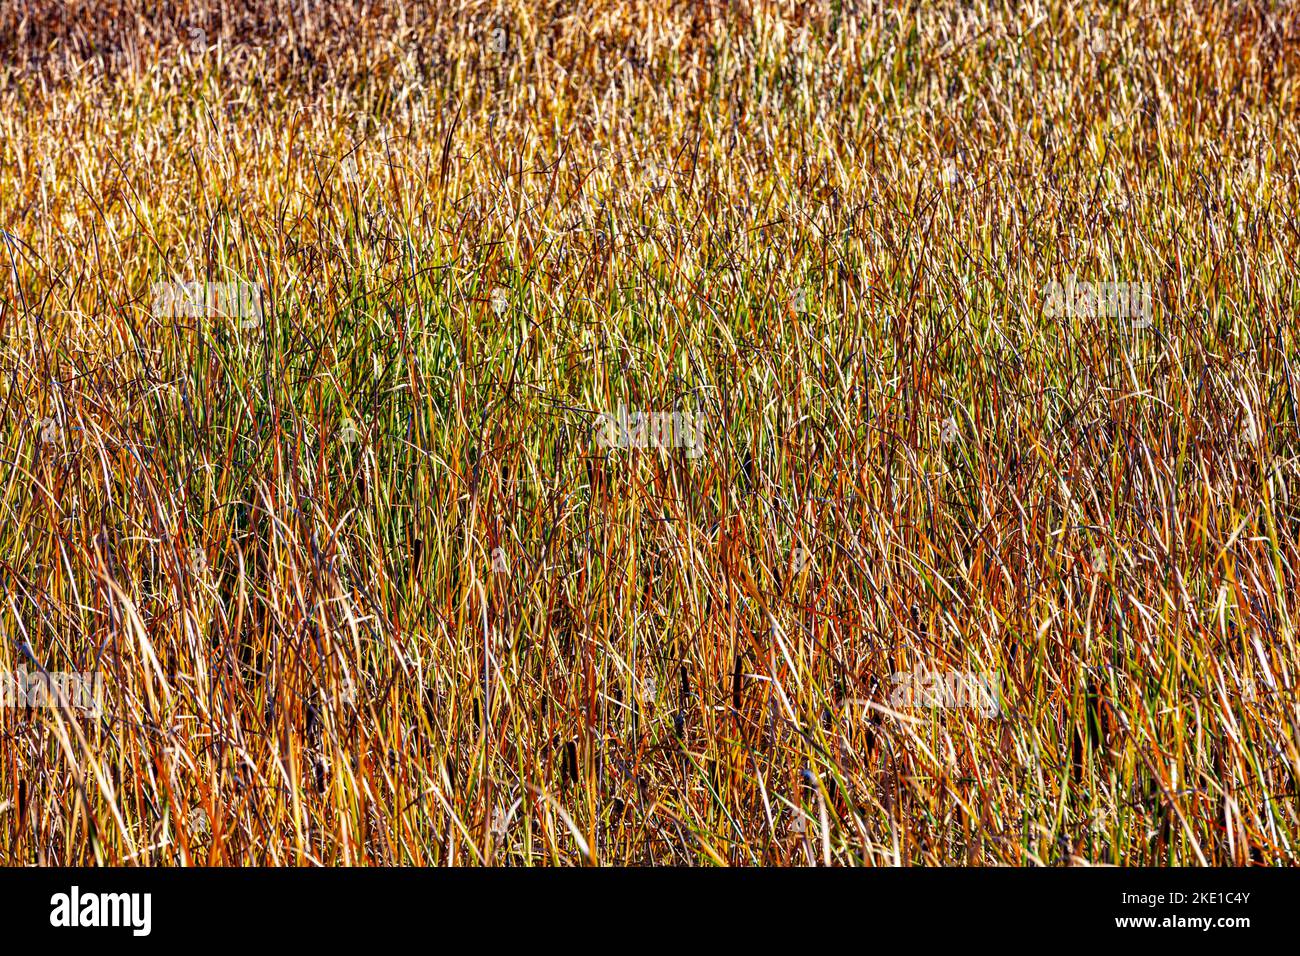 Abstract textural image of reeds and sedges on the banks of the Fraser River Estuary in Richmond British Columbia Canada Stock Photo